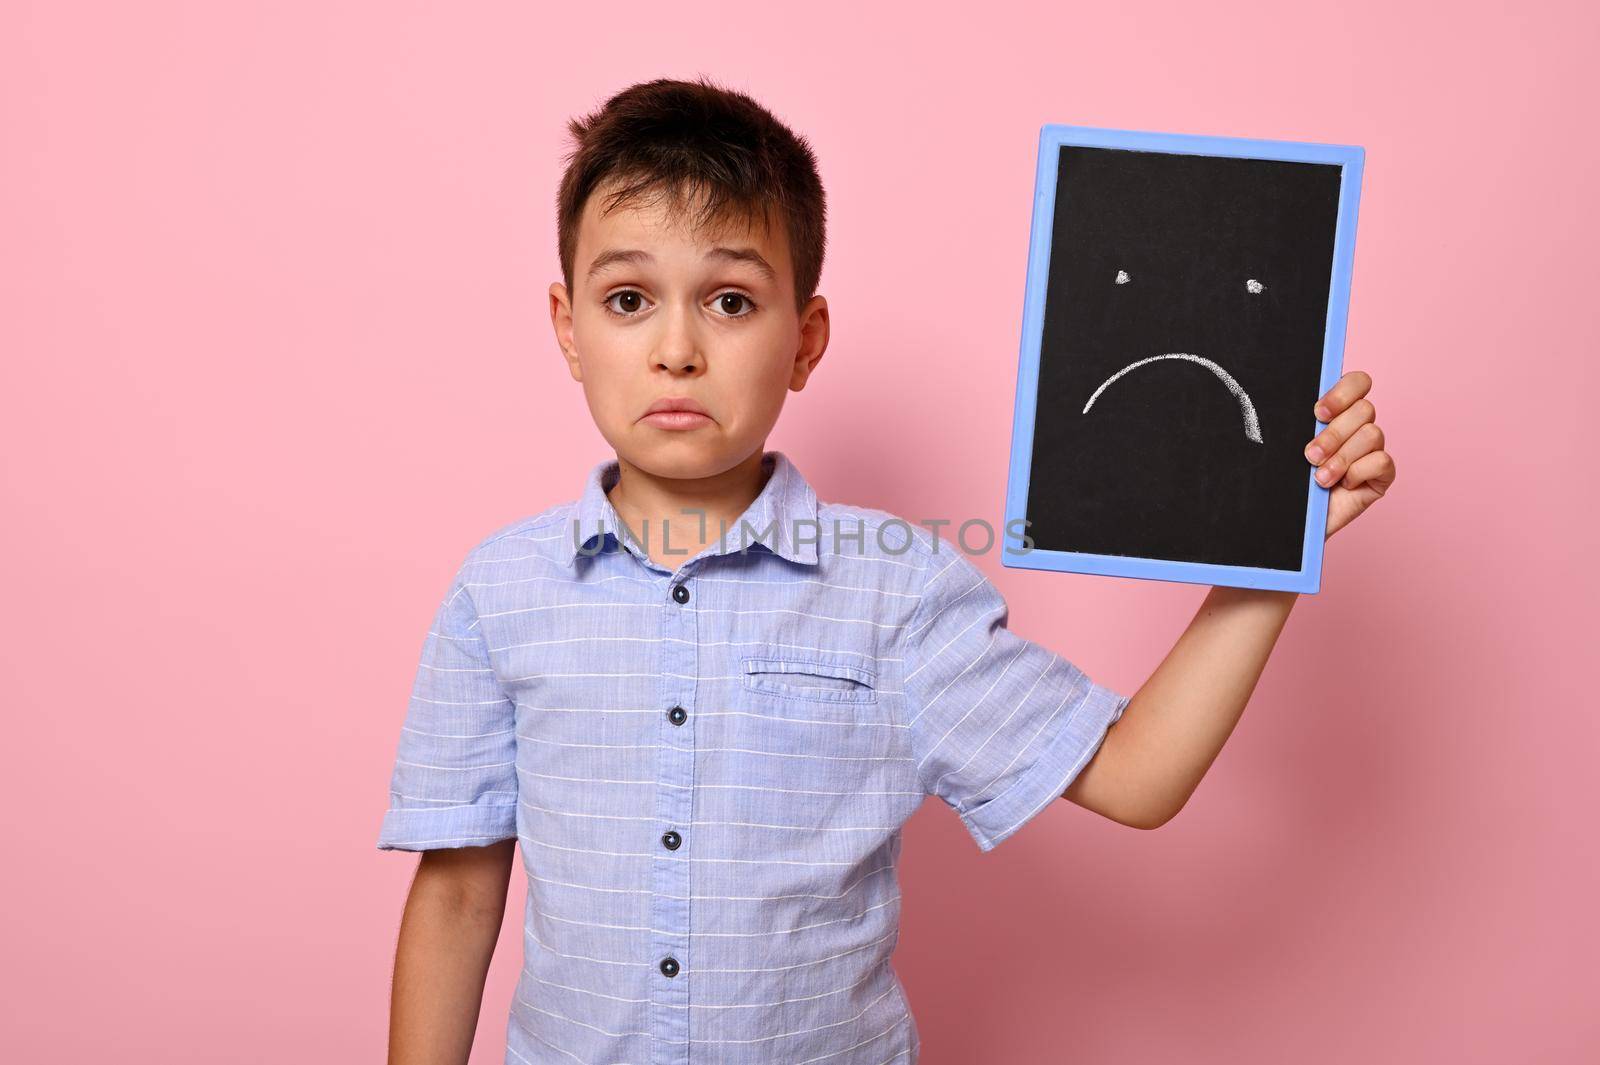 A frustrated boy in a blue shirt holds a blackboard near his face with a painted drawn expressing frustration, sadness and disappointment. Pink background, copy space by artgf